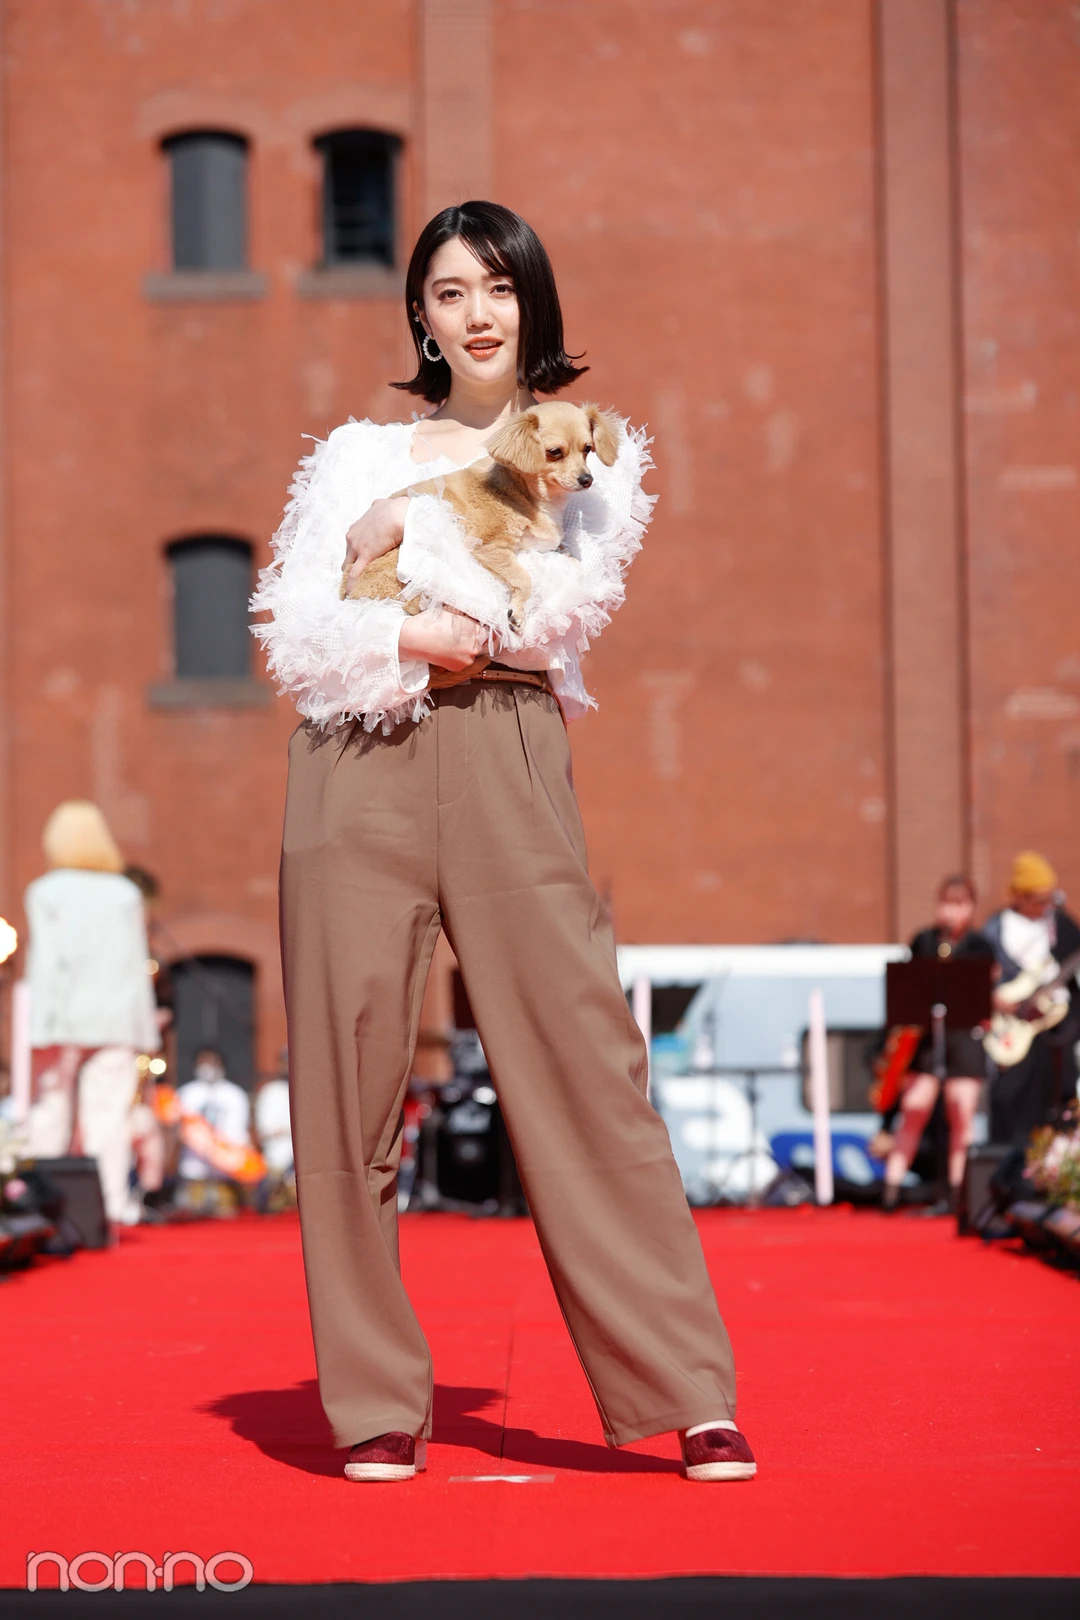 LIFE STYLE with DOGSでSHEINの衣装を着た松川菜々花と愛犬のルル